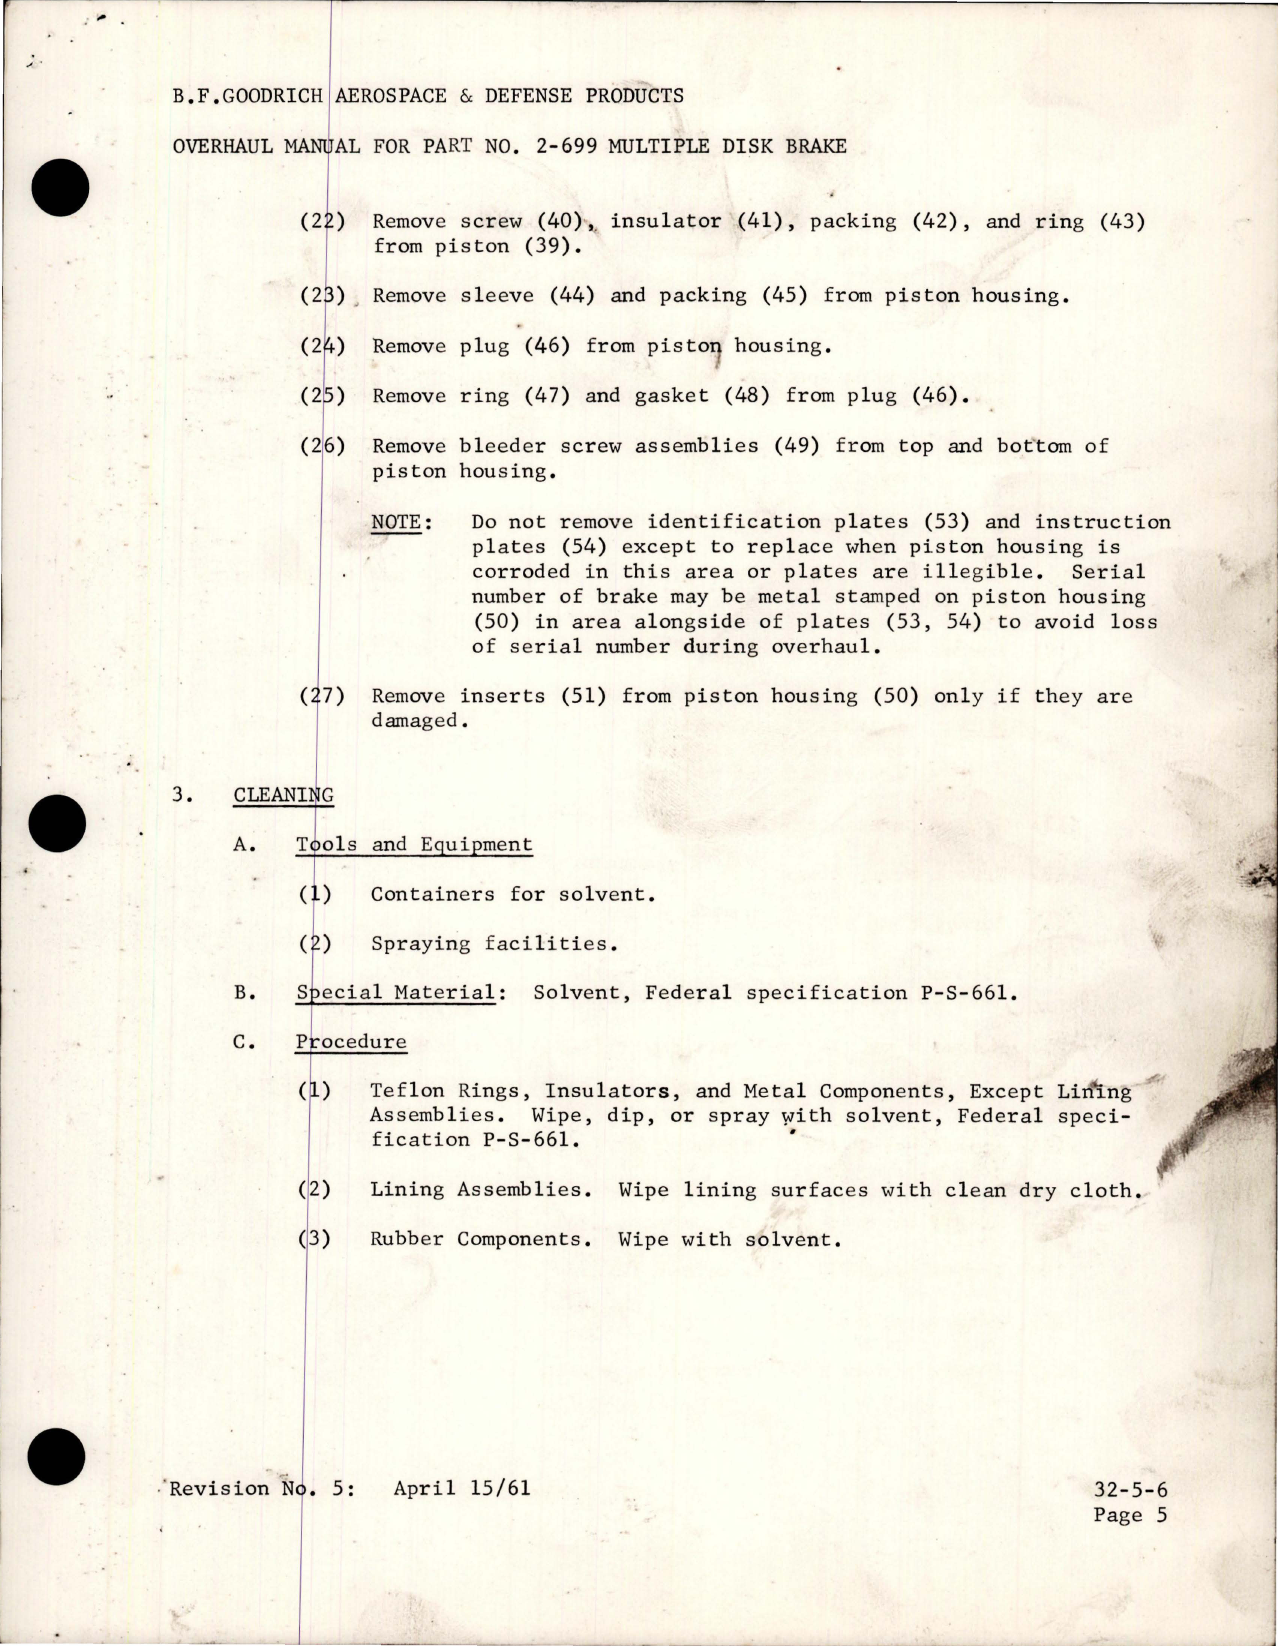 Sample page 9 from AirCorps Library document: Overhaul Manual for Multiple Disk Brake - Part 2-699 